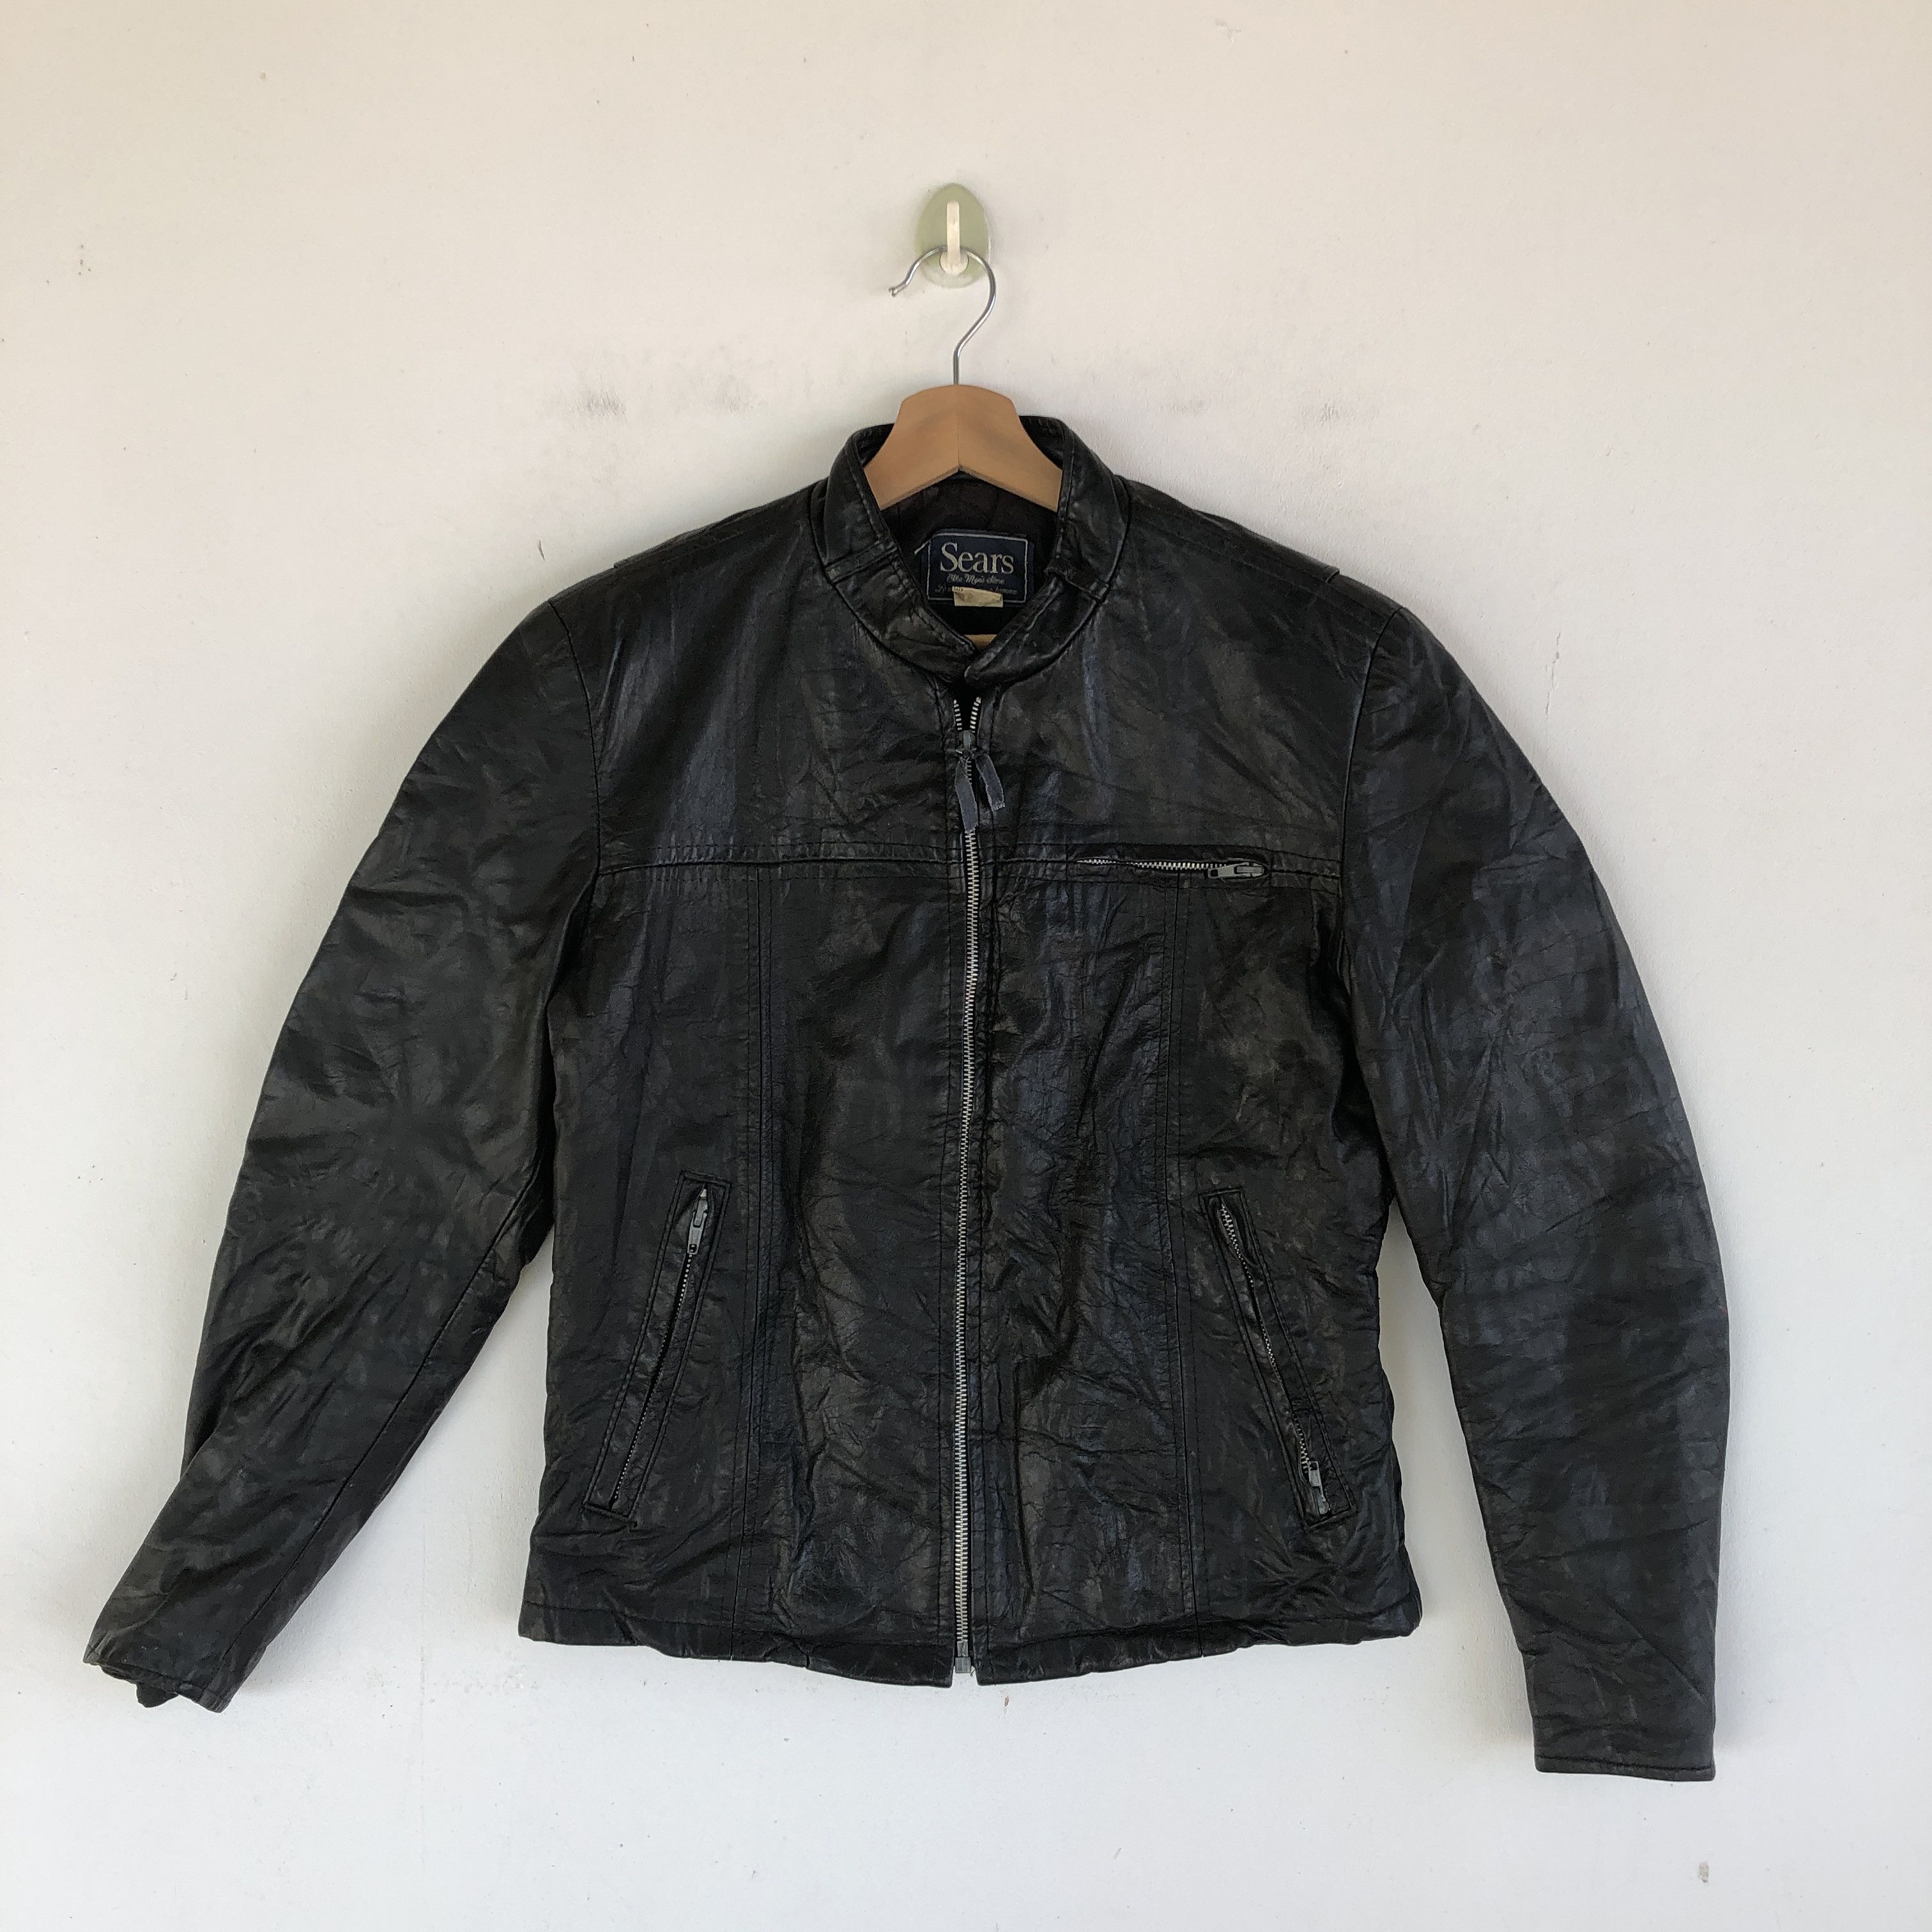 Vintage Vintage Sears Motorcycle Cropped Leather Jacket Size XXS / US 00 / IT 34 - 1 Preview